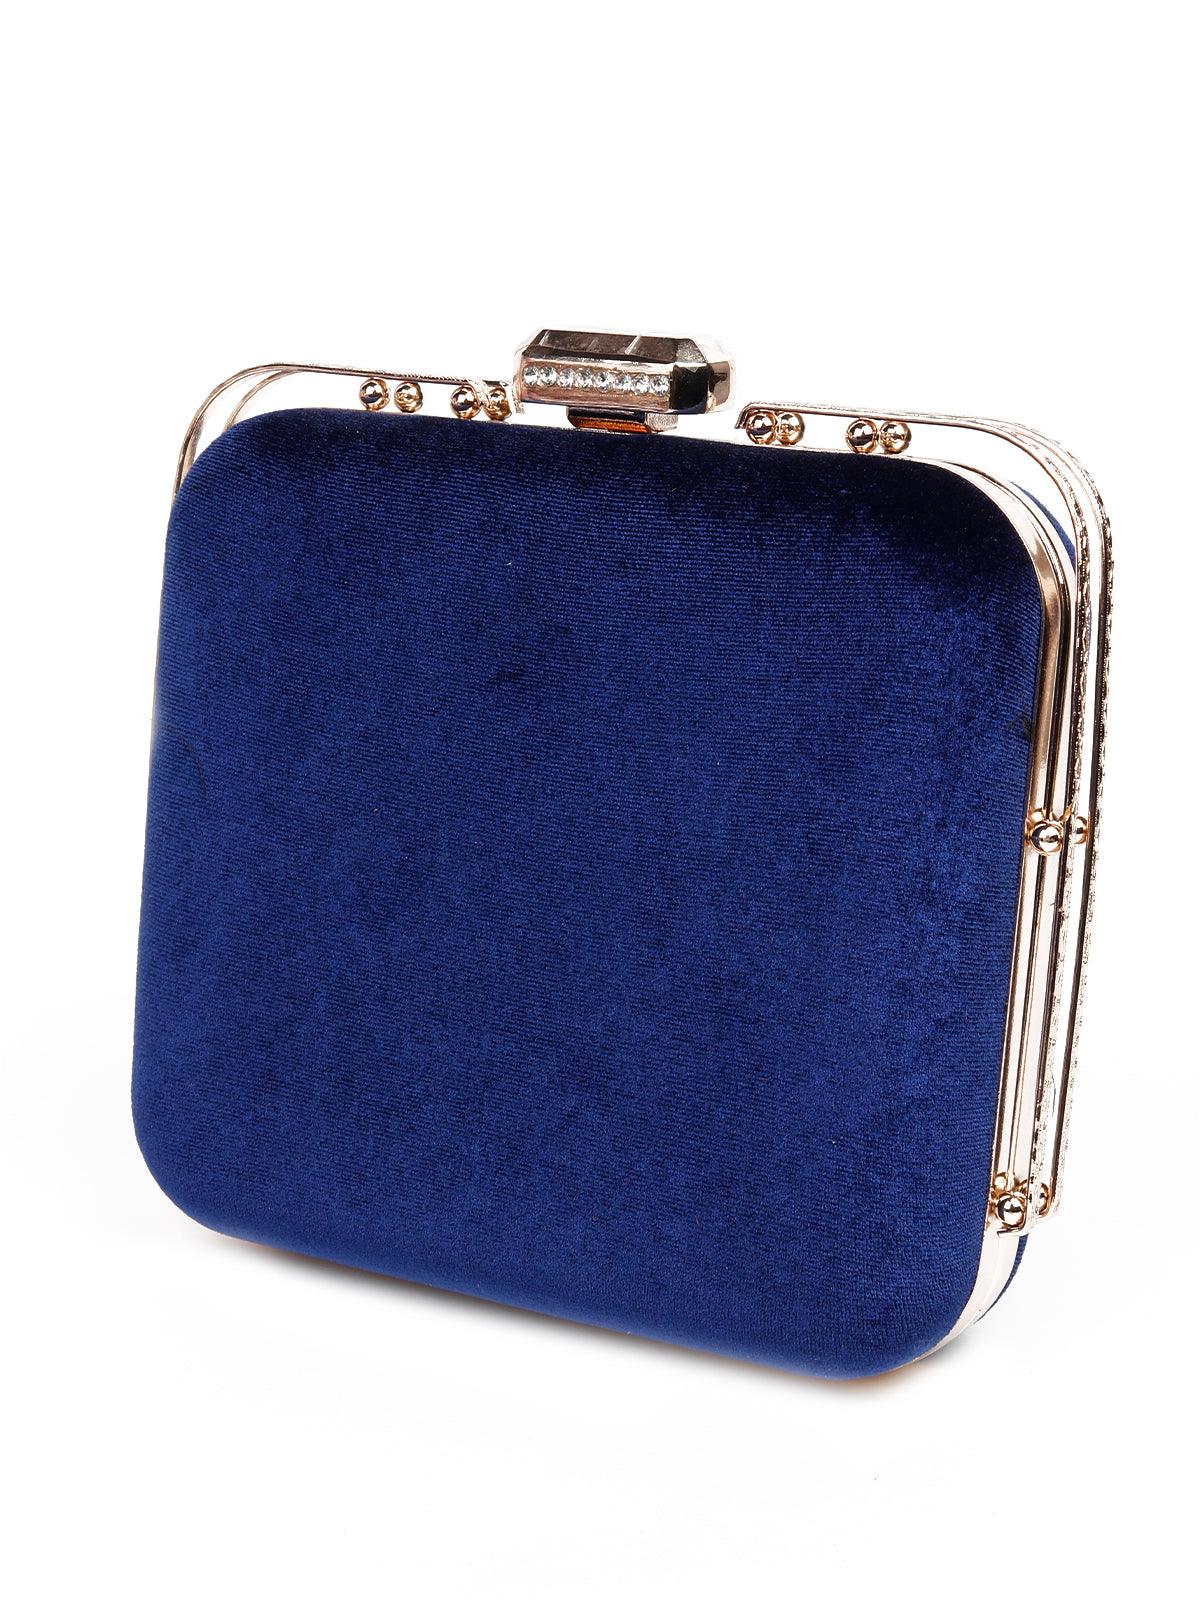 Royal Blue Sequined Evening Clutch Purse | Baginning